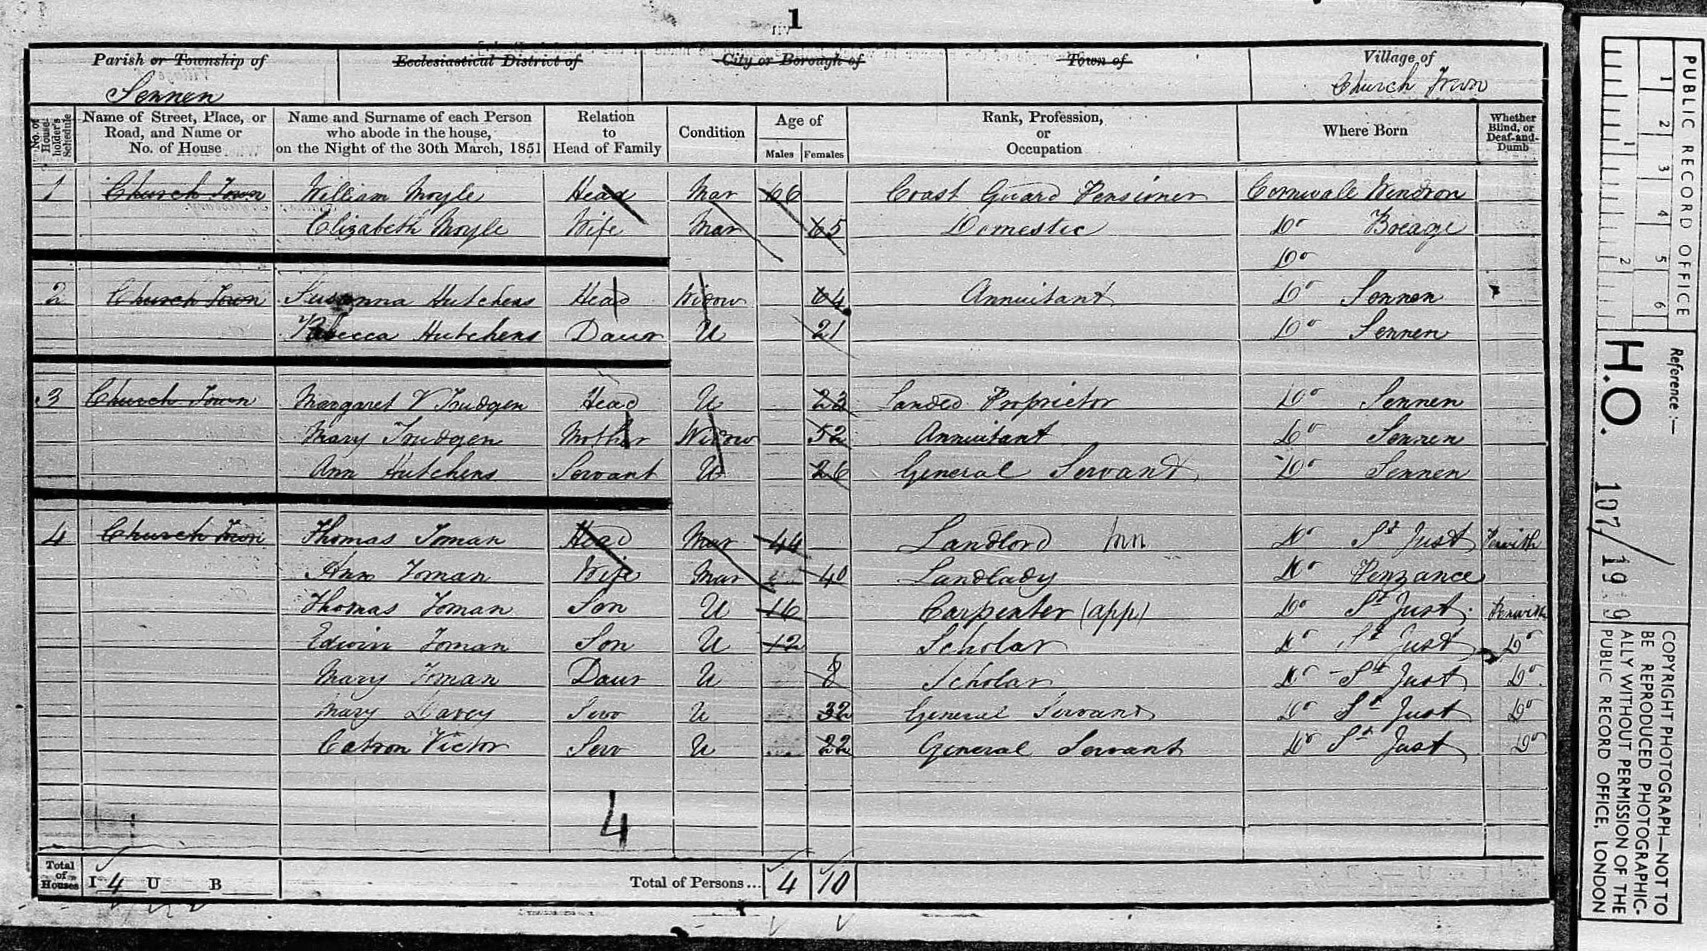 1851 census on TheGenealogist records the neighbours